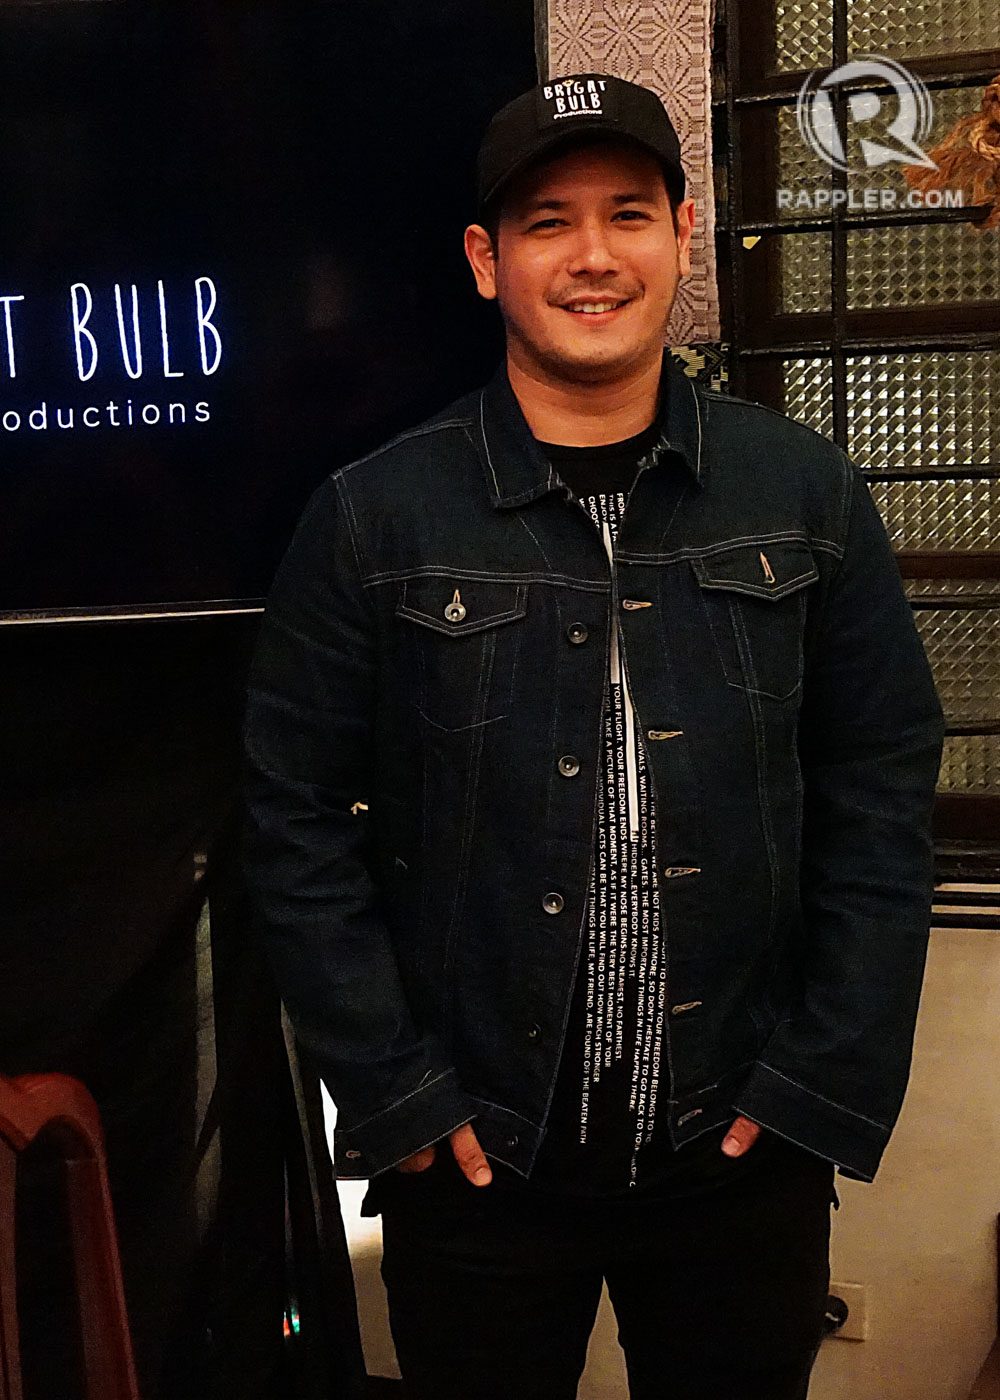 DIRECTOR. John Prats is now on the other side of the cameras, serving as a director for Bright Bulb Productions. 